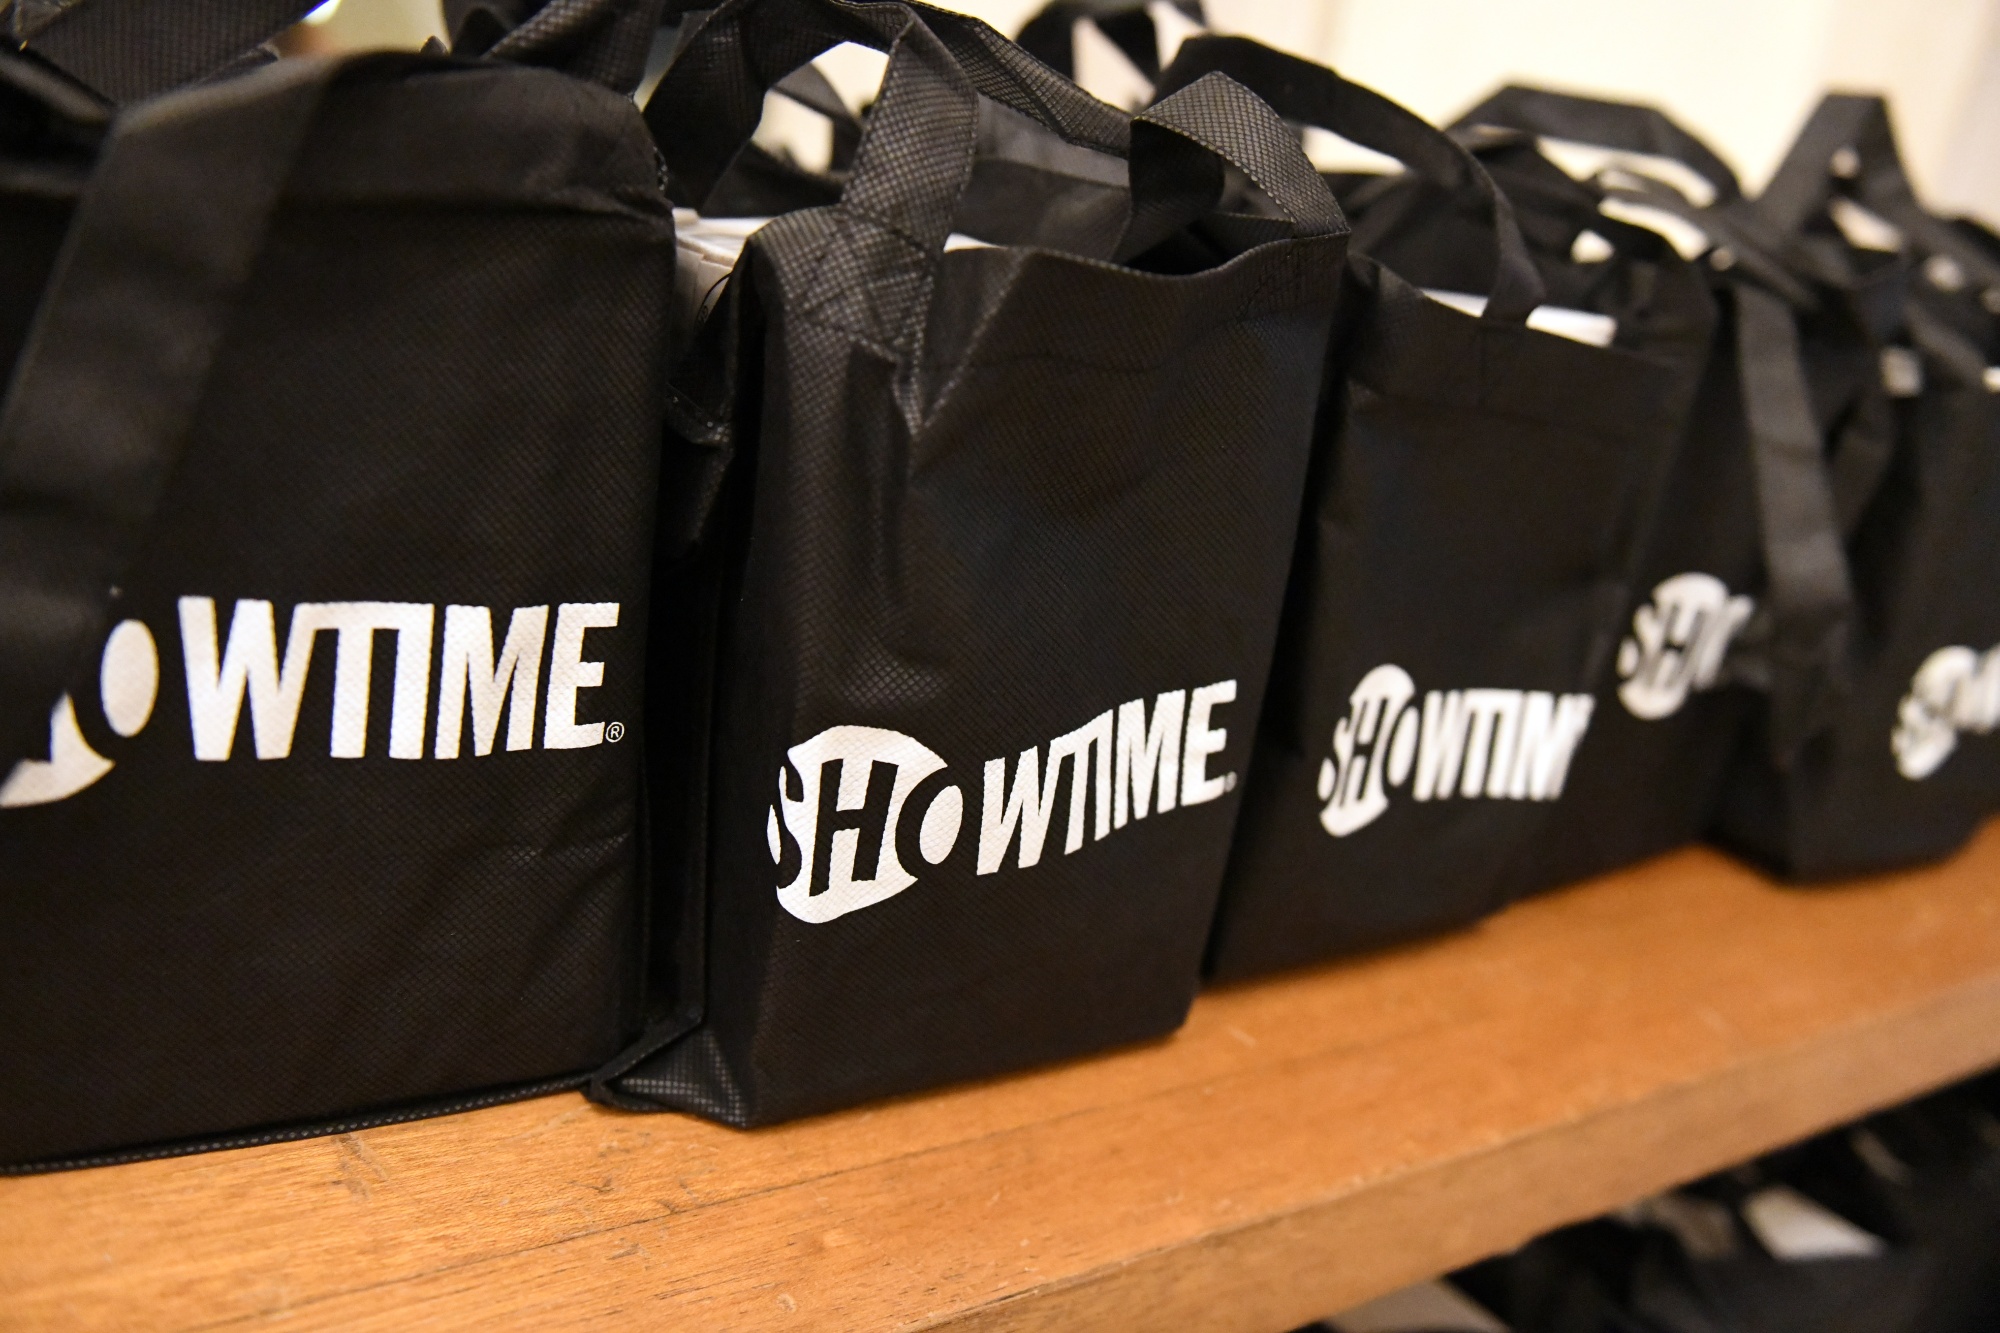 Showtime Sports shutting down at end of 2023, bringing an end to